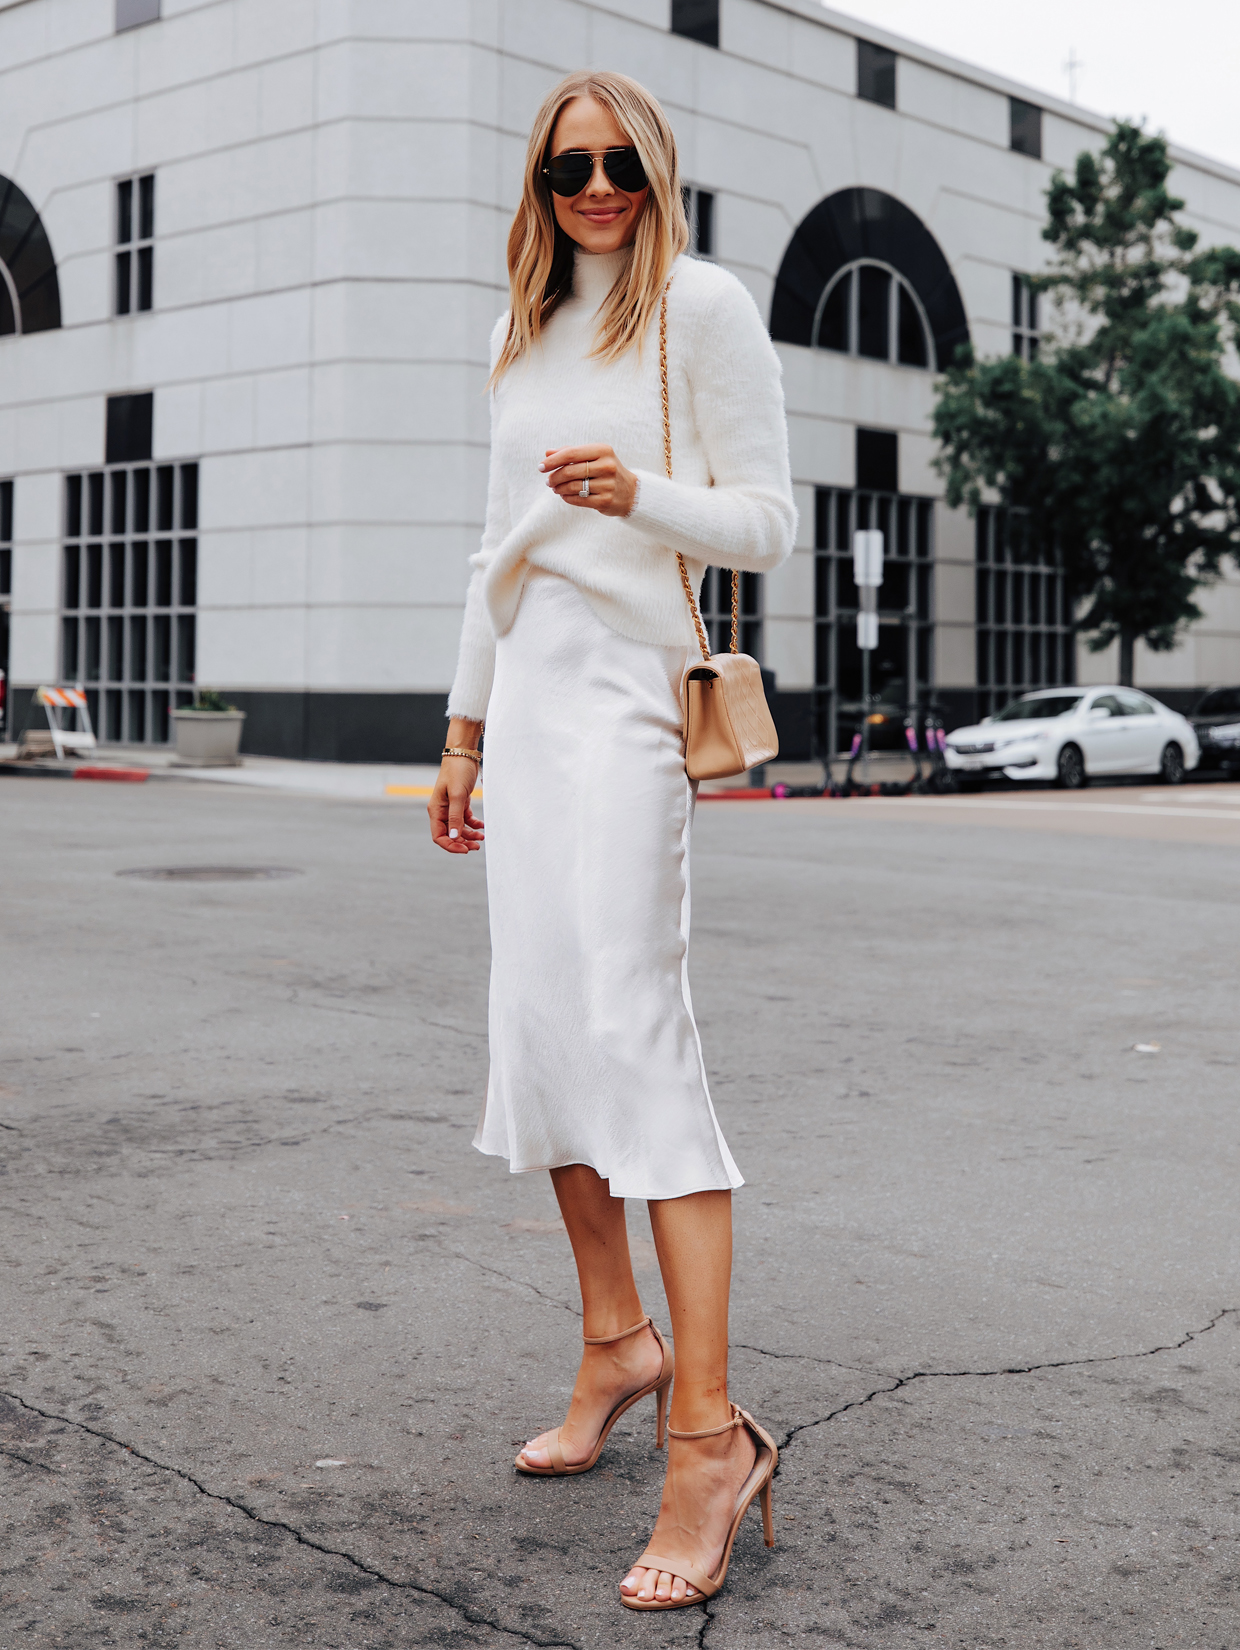 Winter White Outfit Idea For A Casual Holiday Party